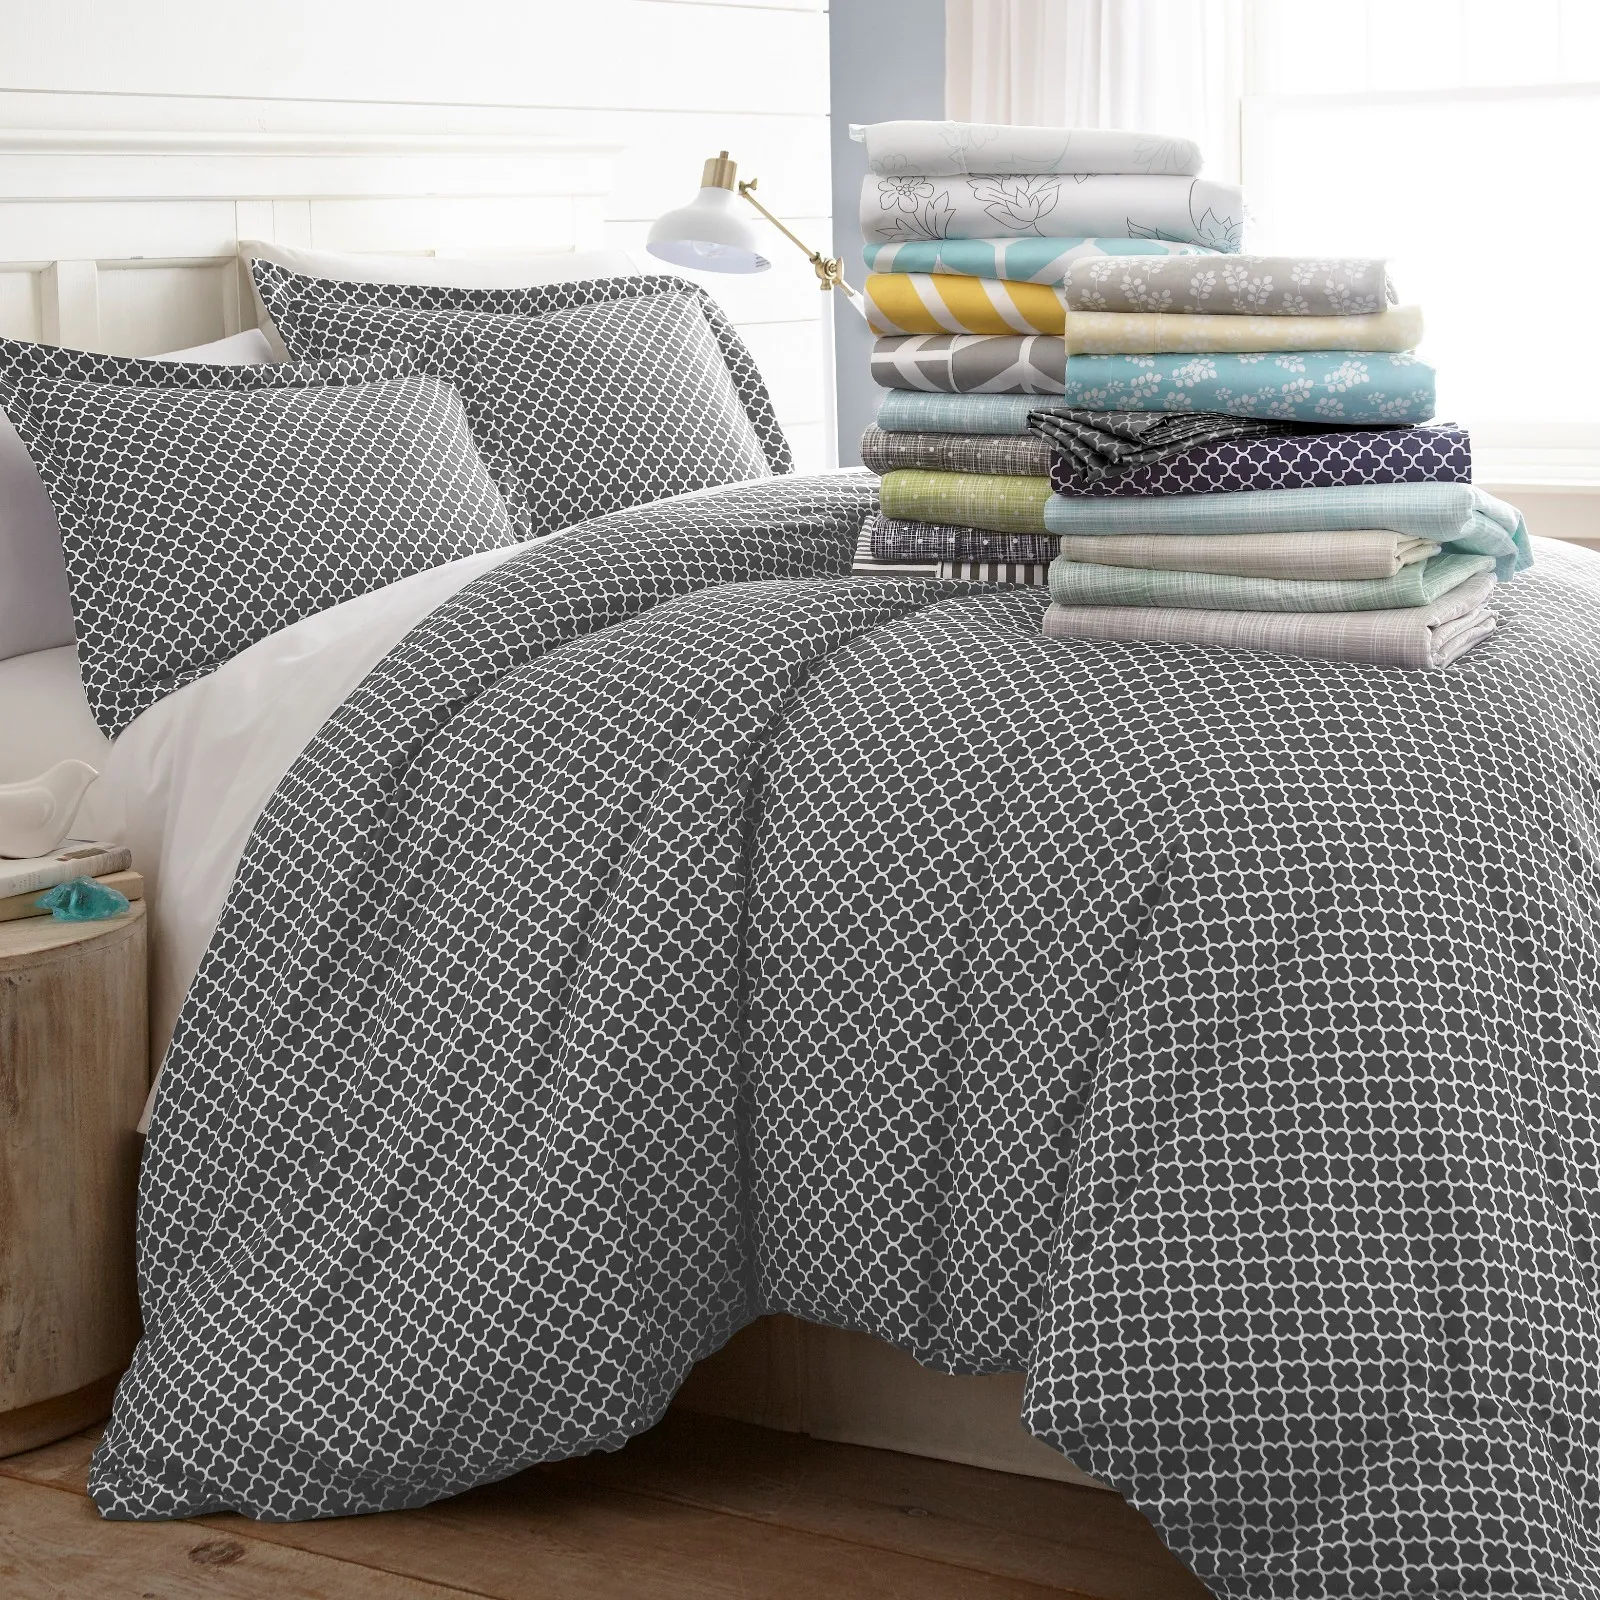 Hotel Luxury 3PC Patterned Duvet Cover Sets - 8 Designs by Kaycie Gray Fashion-animated-img